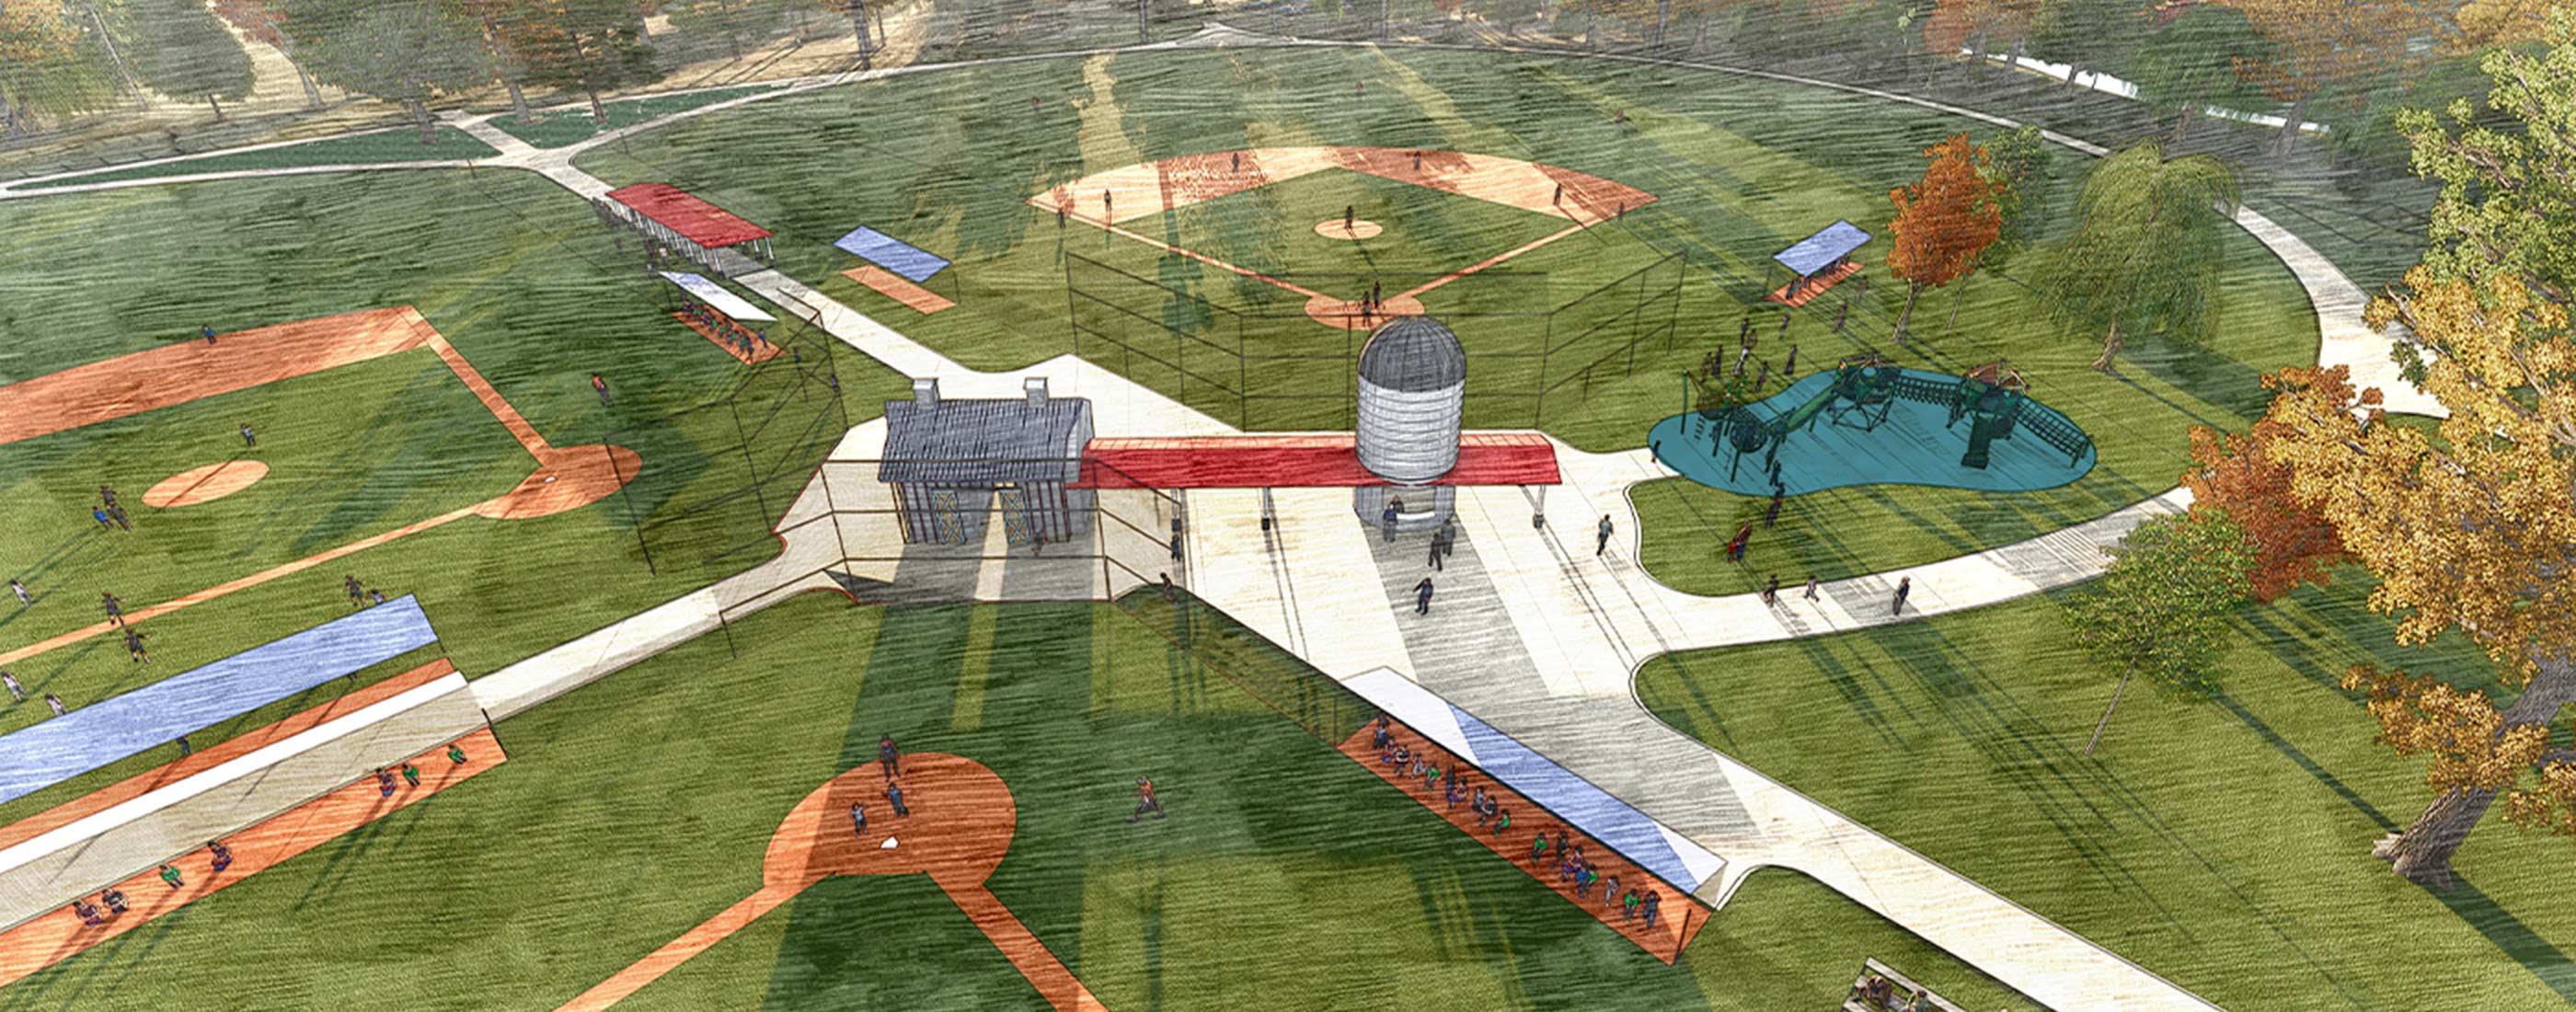 McGill Park's master plan includes a baseball complex with concession stand.